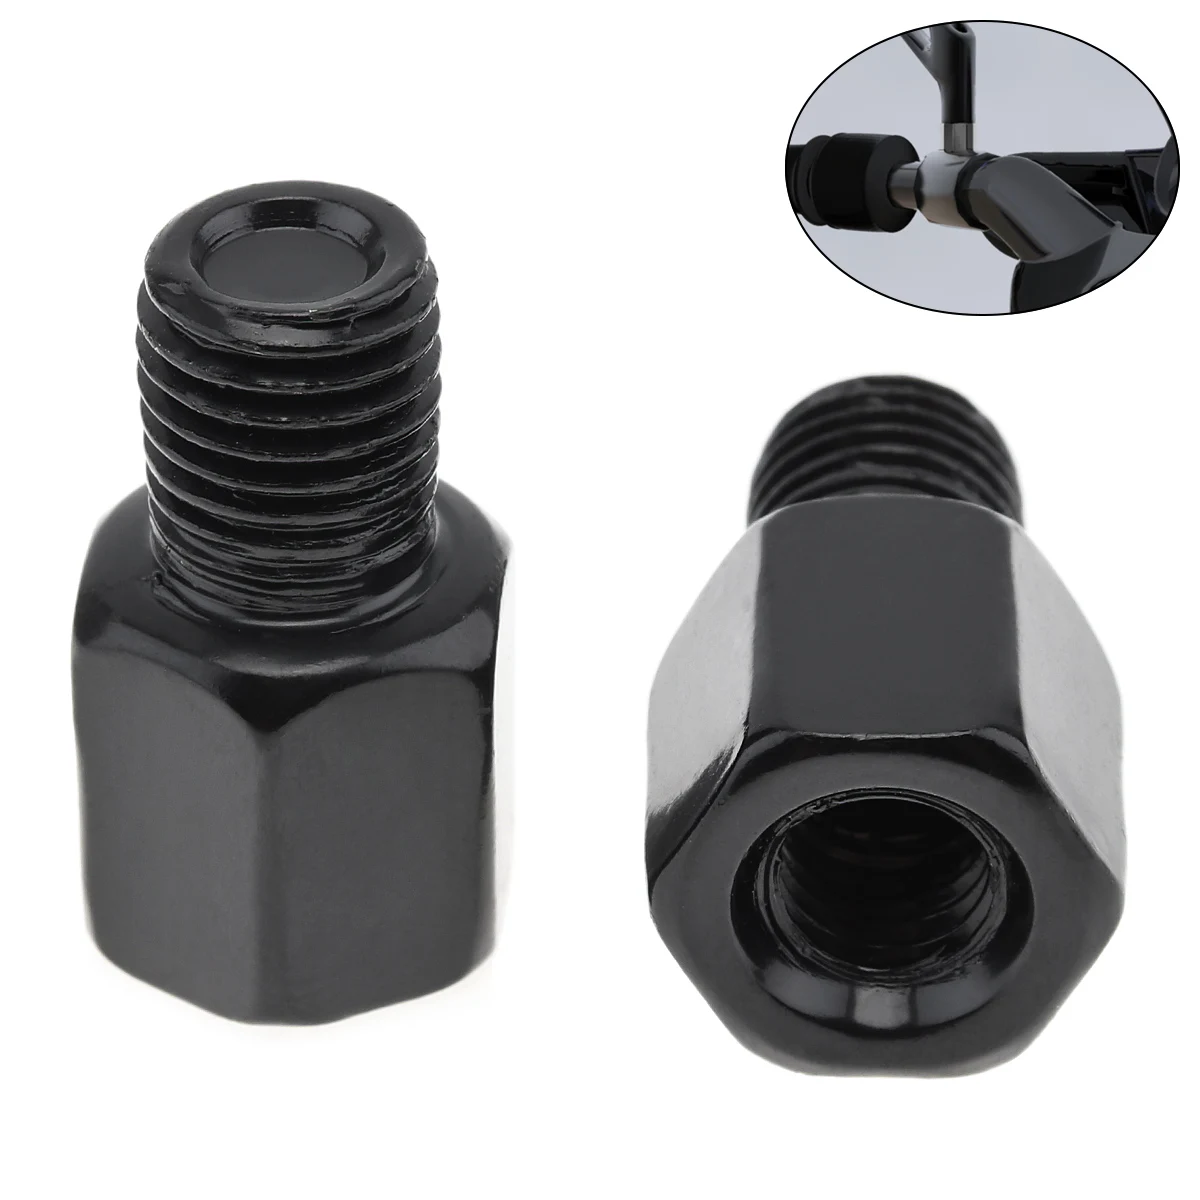 

1pcs Motorcycle Rearview Mirror Adapters Screws 8mm to 10mm Reverse Right Left Thread Adapter Conversion Screw Convenient Tools